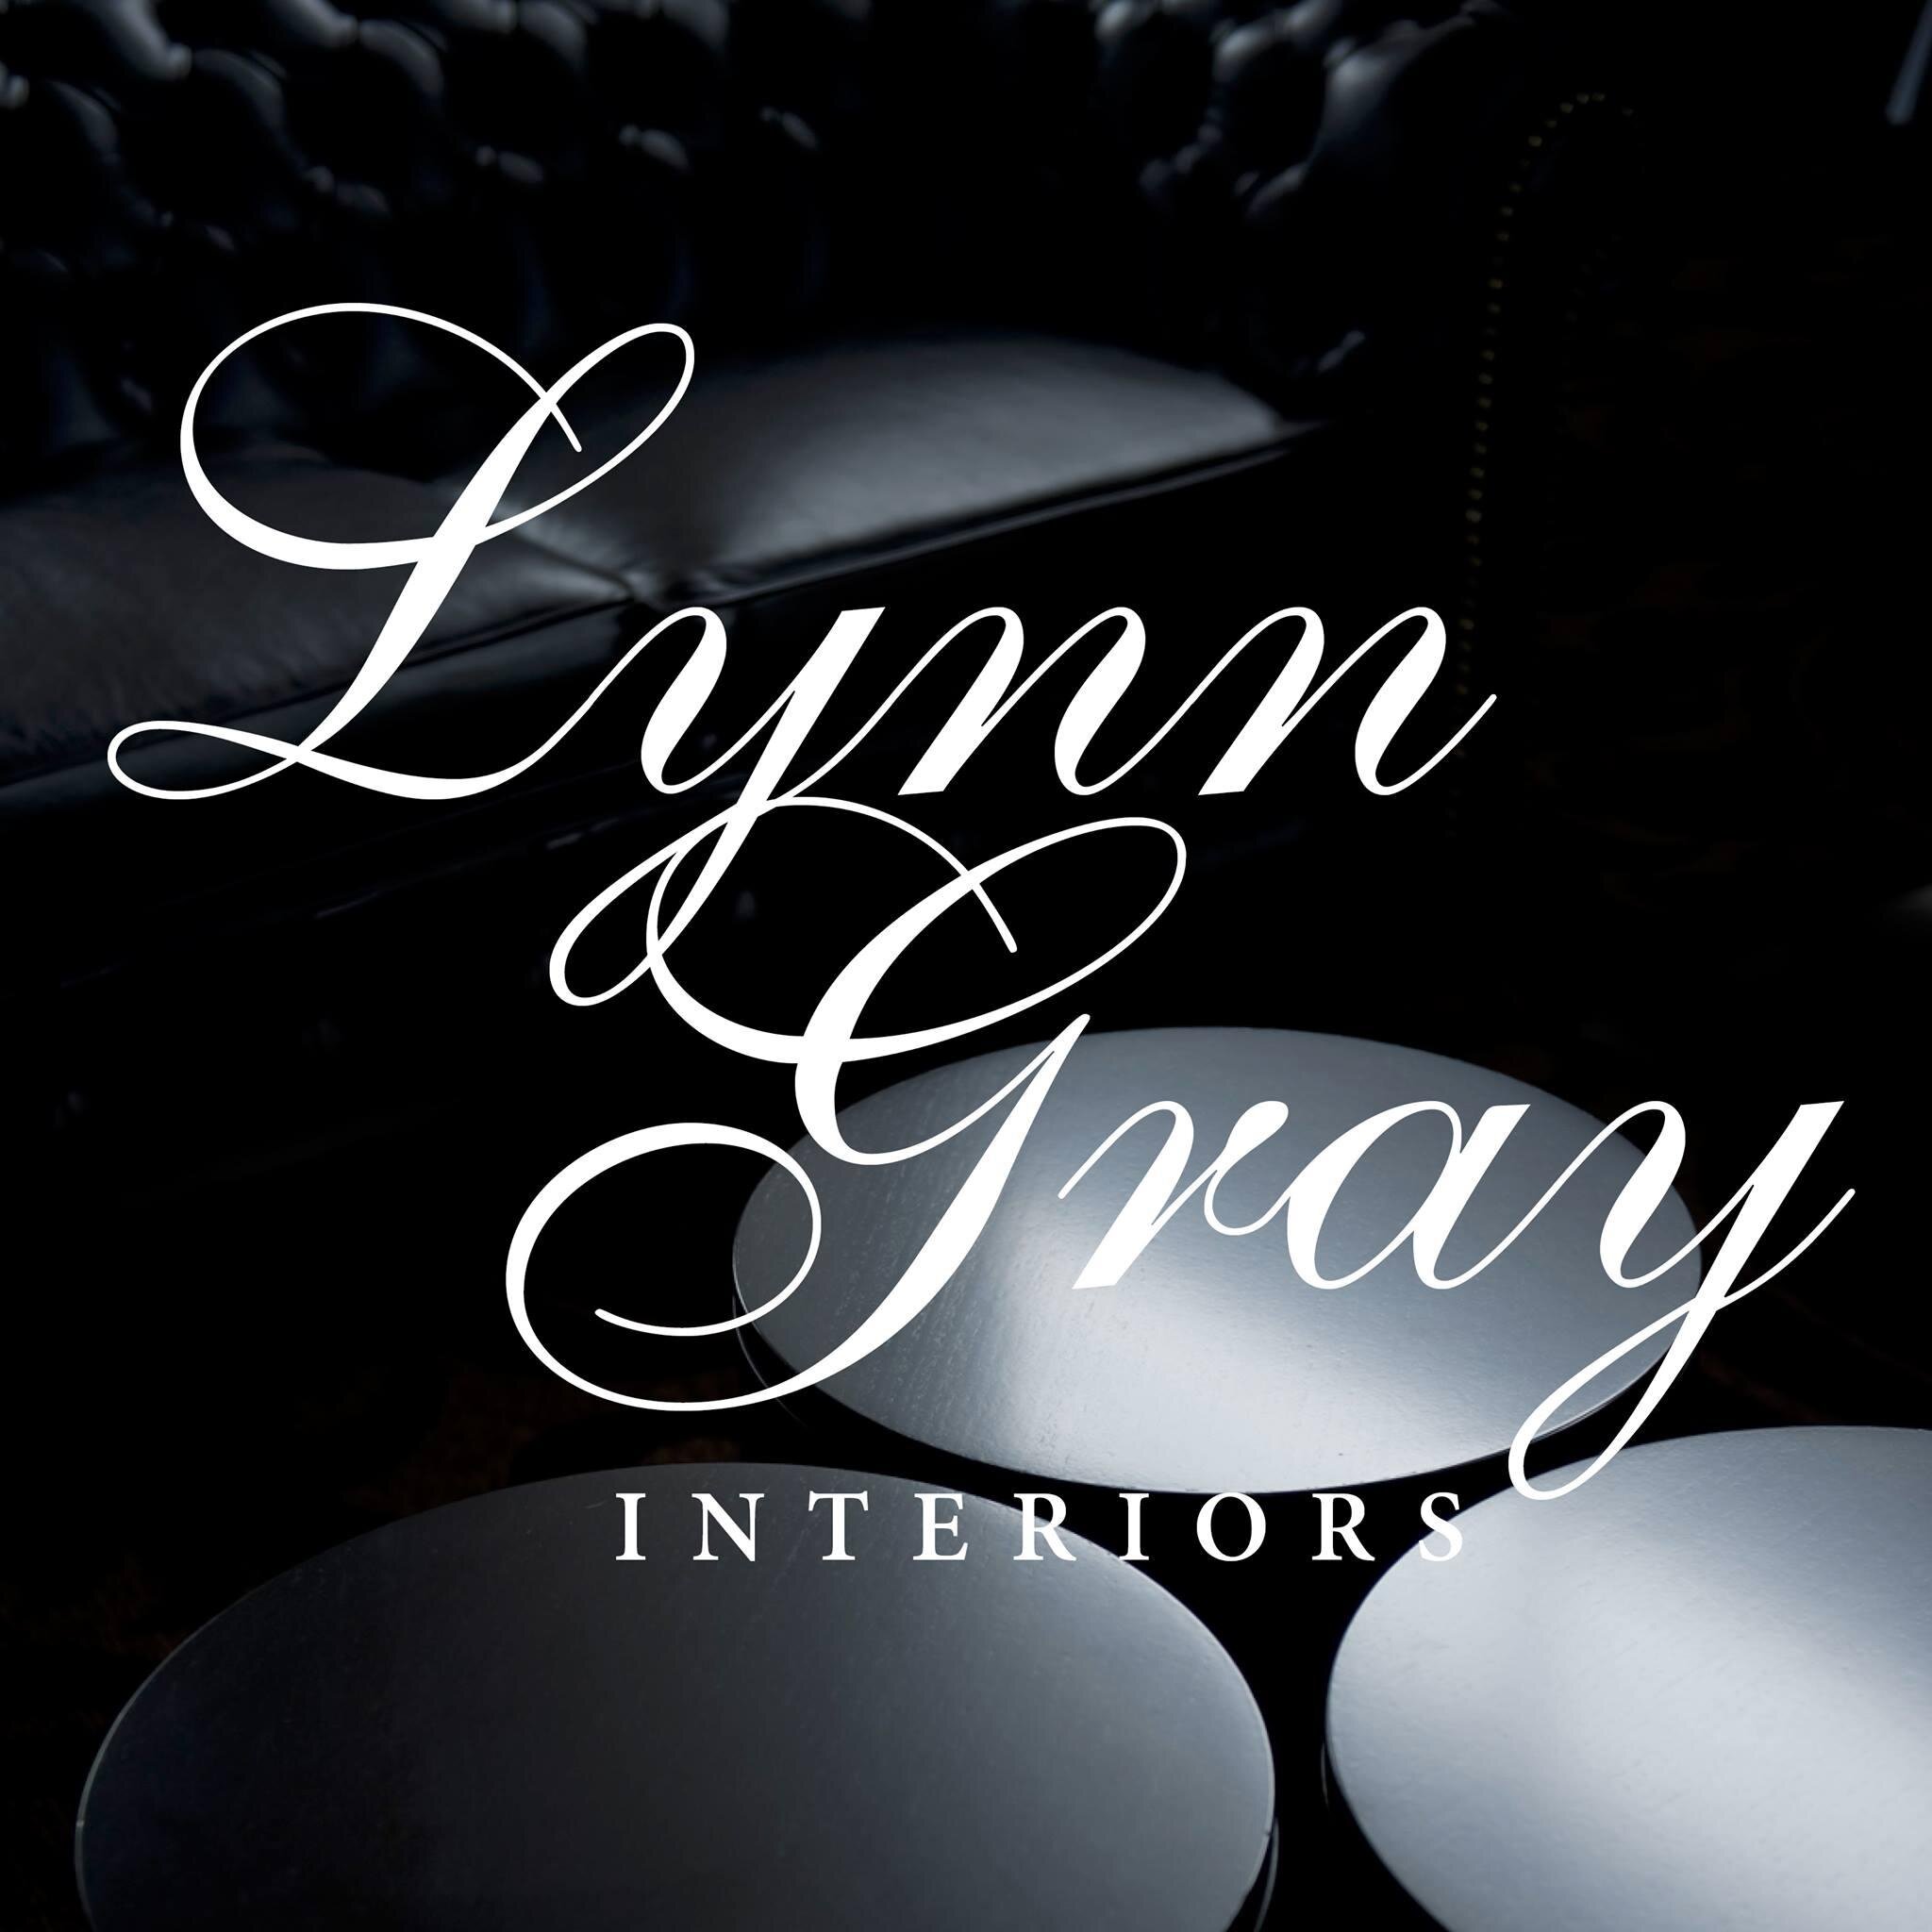 Award winning Interior Designer Lynn Gray has been working with clients on Commercial and Residential projects for over six years.